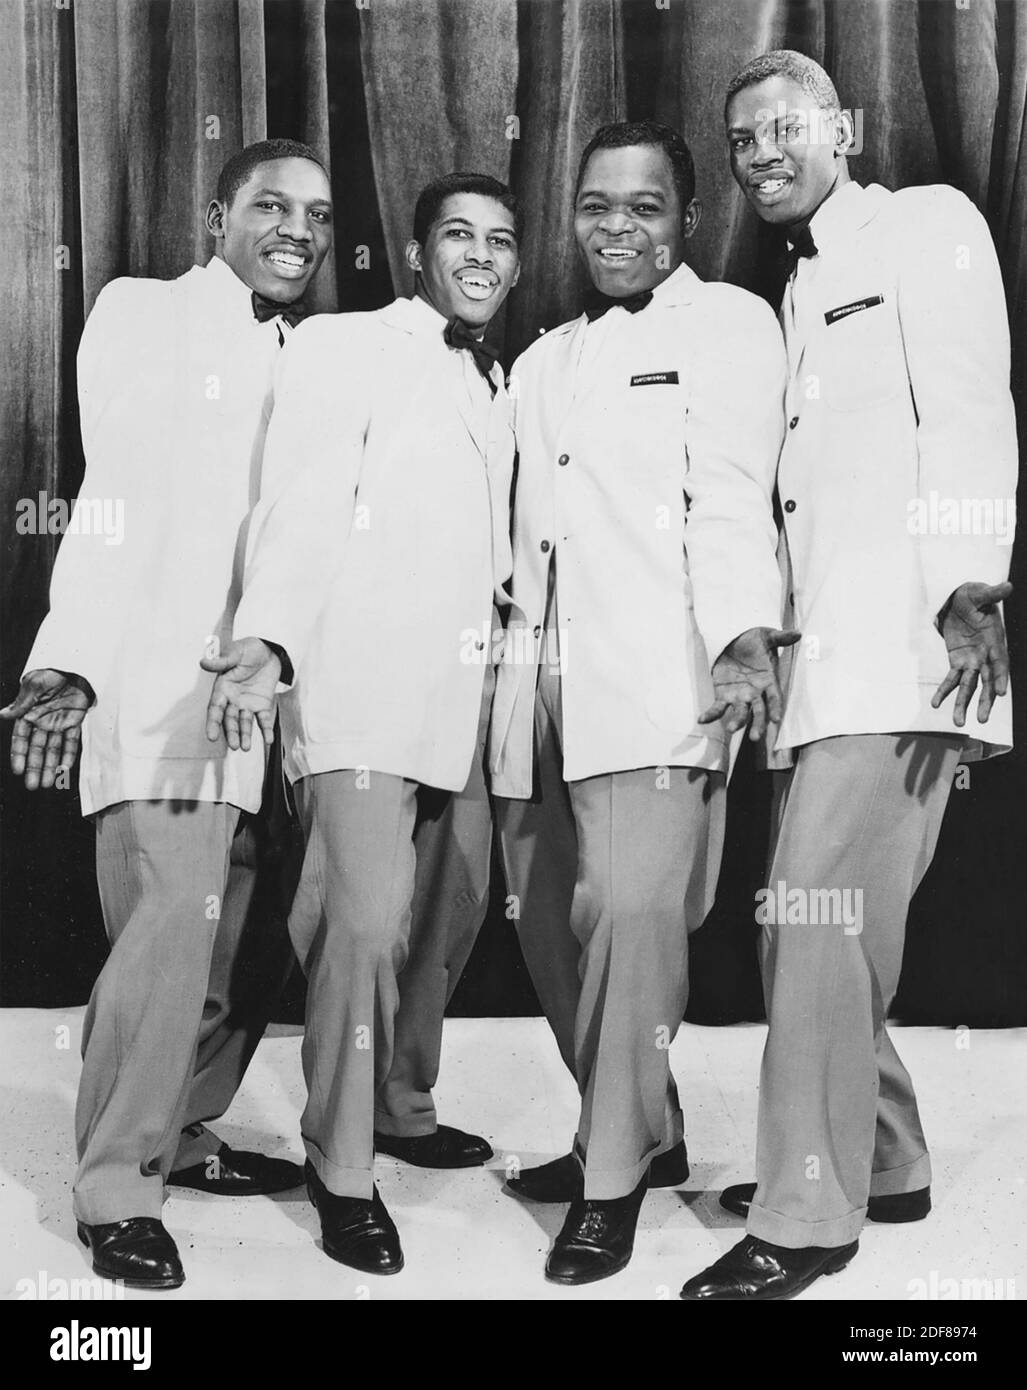 THE DRIFTERS  Promotional photo of American doo-wop and R&B group in 1959 with Ben. E.King second from left as lead tenor. He left the group in mid 1960. Stock Photo